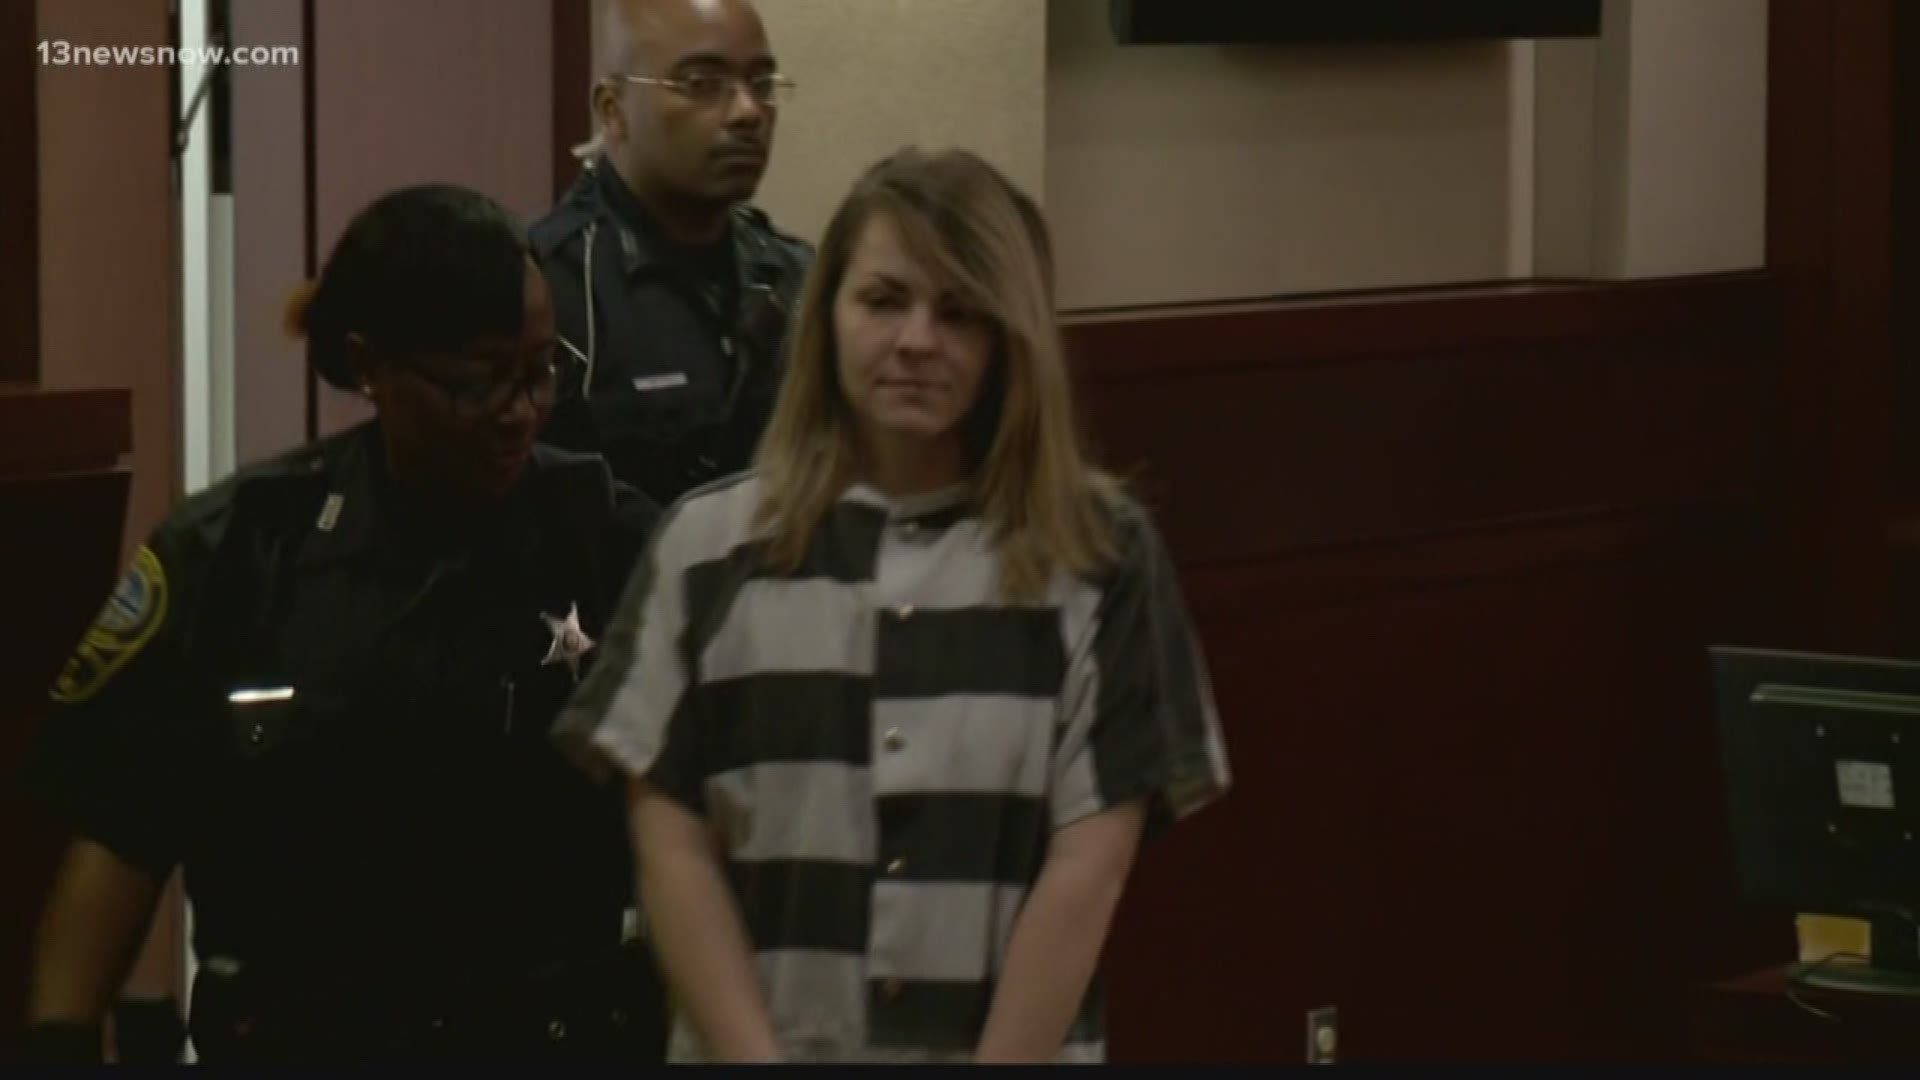 A judge denied bond for Shelby Love and John Hardee who were in court Monday morning. 13News Now Elise Brown has more.